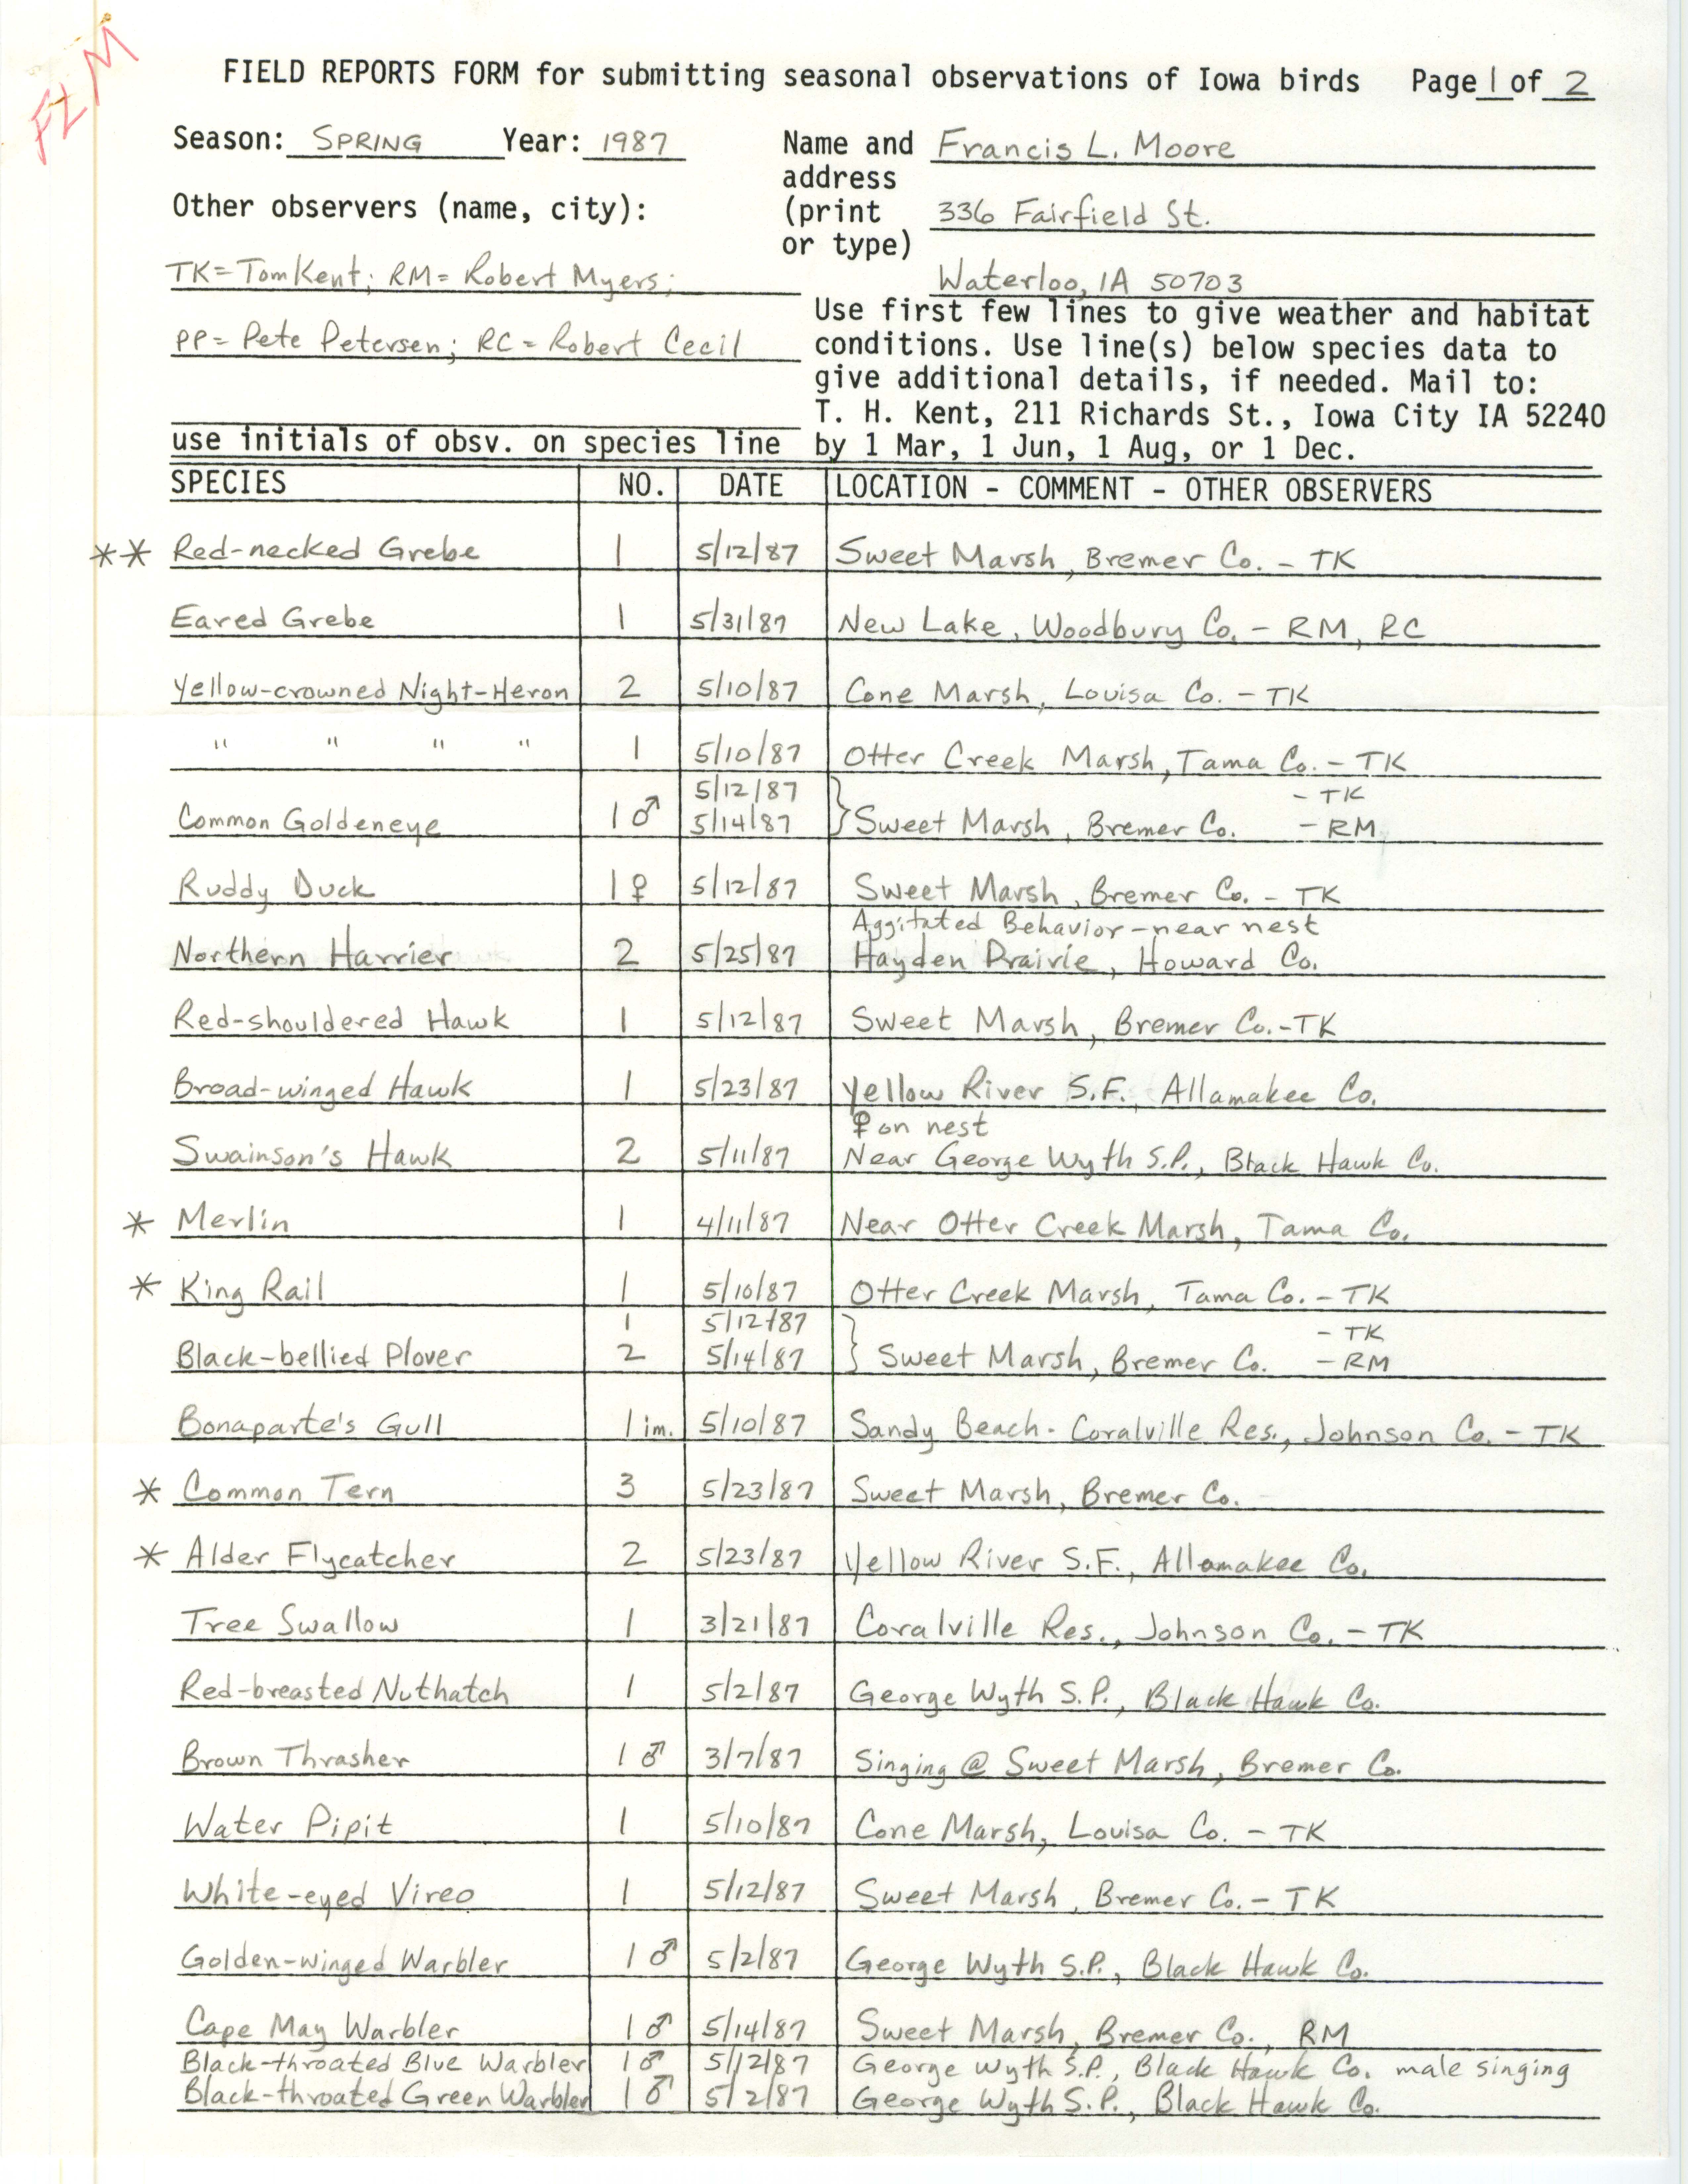 Field reports form for submitting seasonal observations of Iowa birds, Francis L. Moore, spring 1987